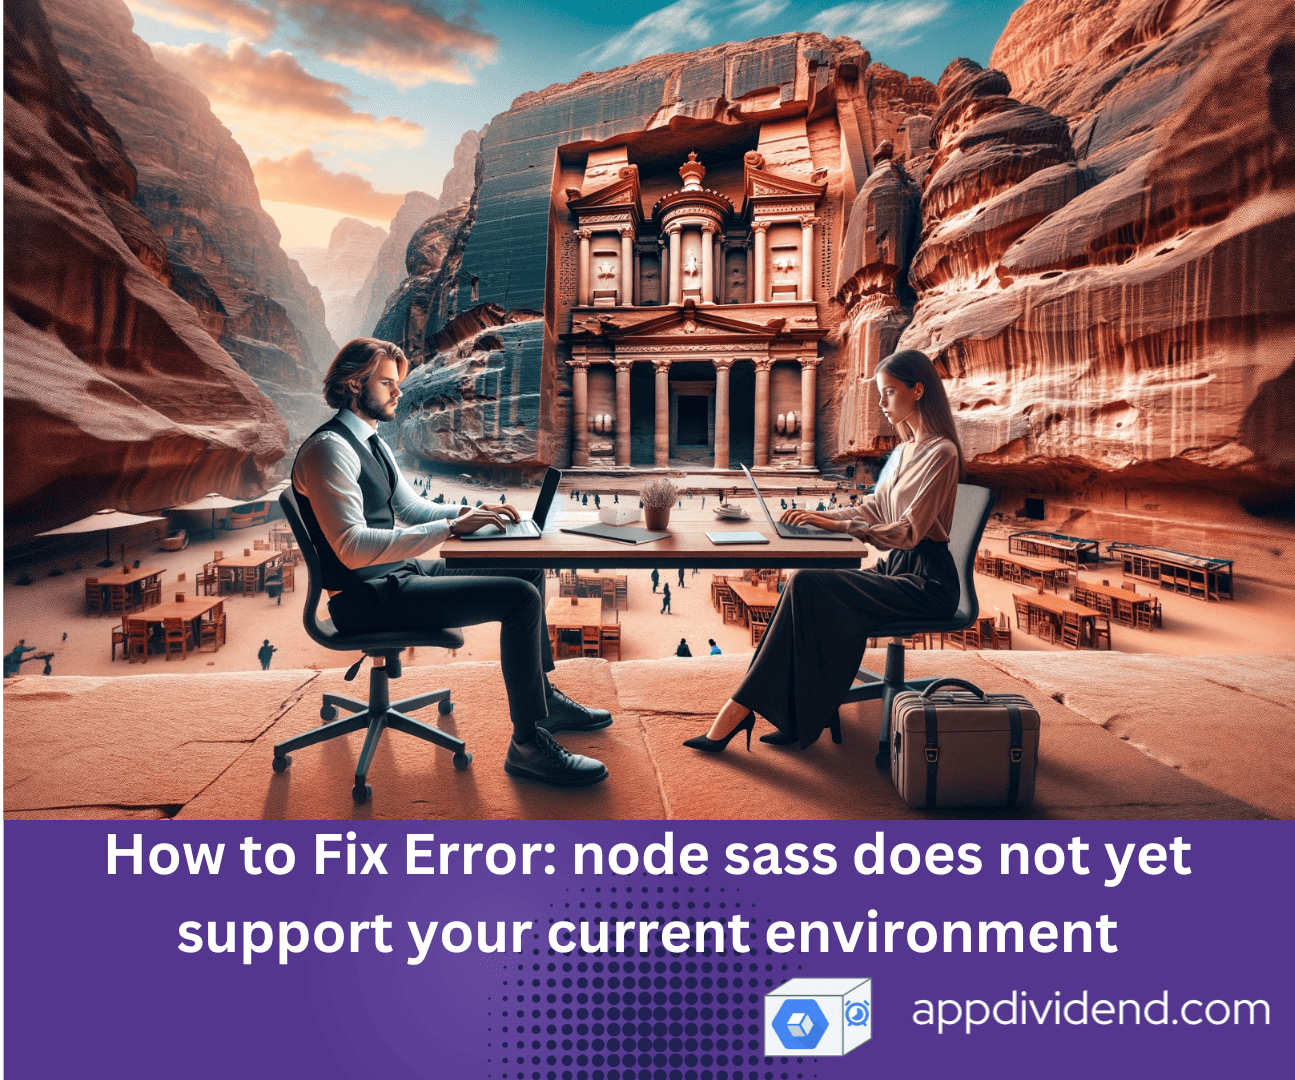 How to Fix Error - node sass does not yet support your current environment